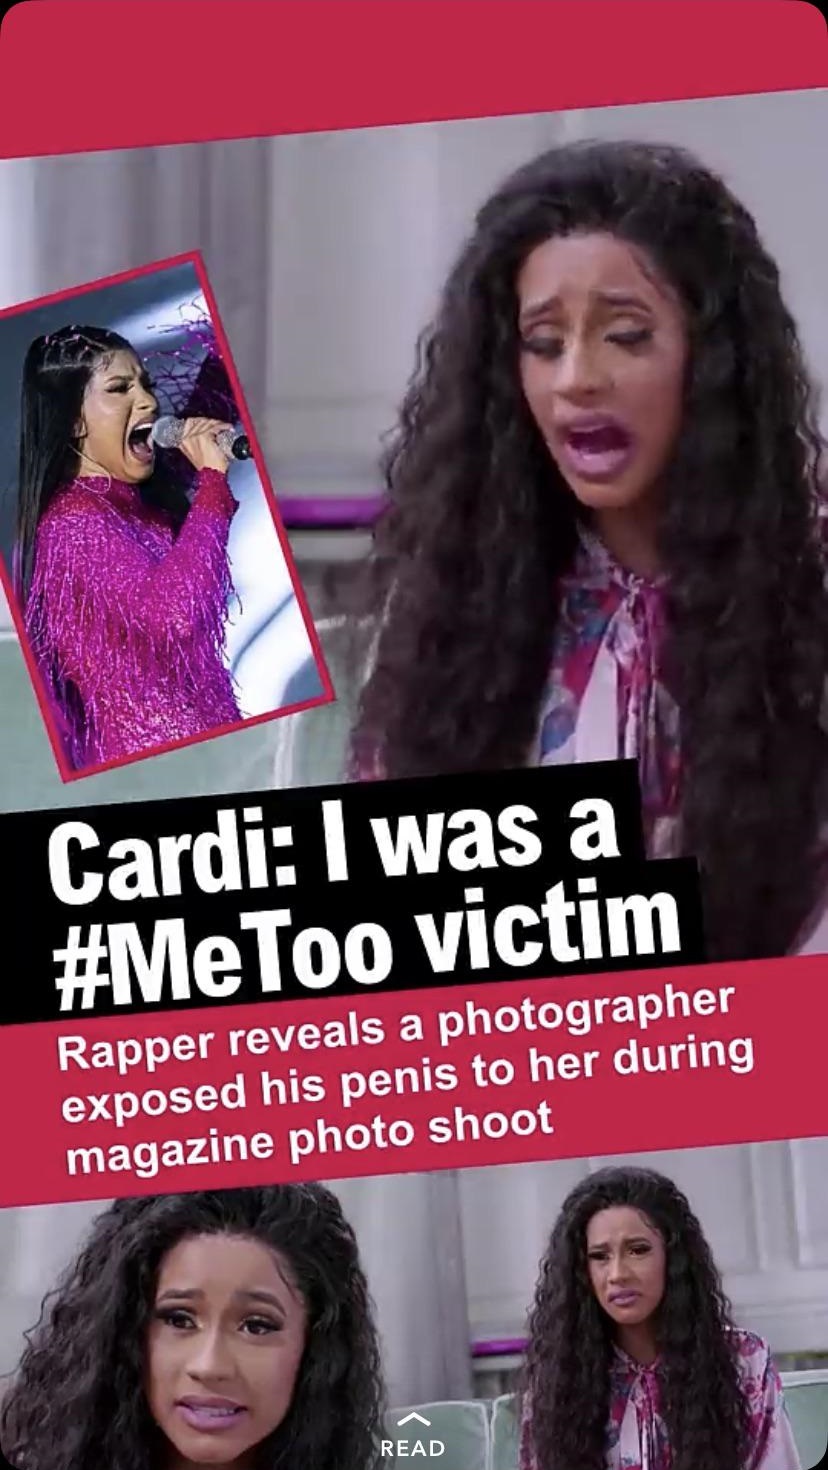 e magazine - Cardi I was a victim Rapper reveals a photographer exposed his penis to her during magazine photo shoot Read